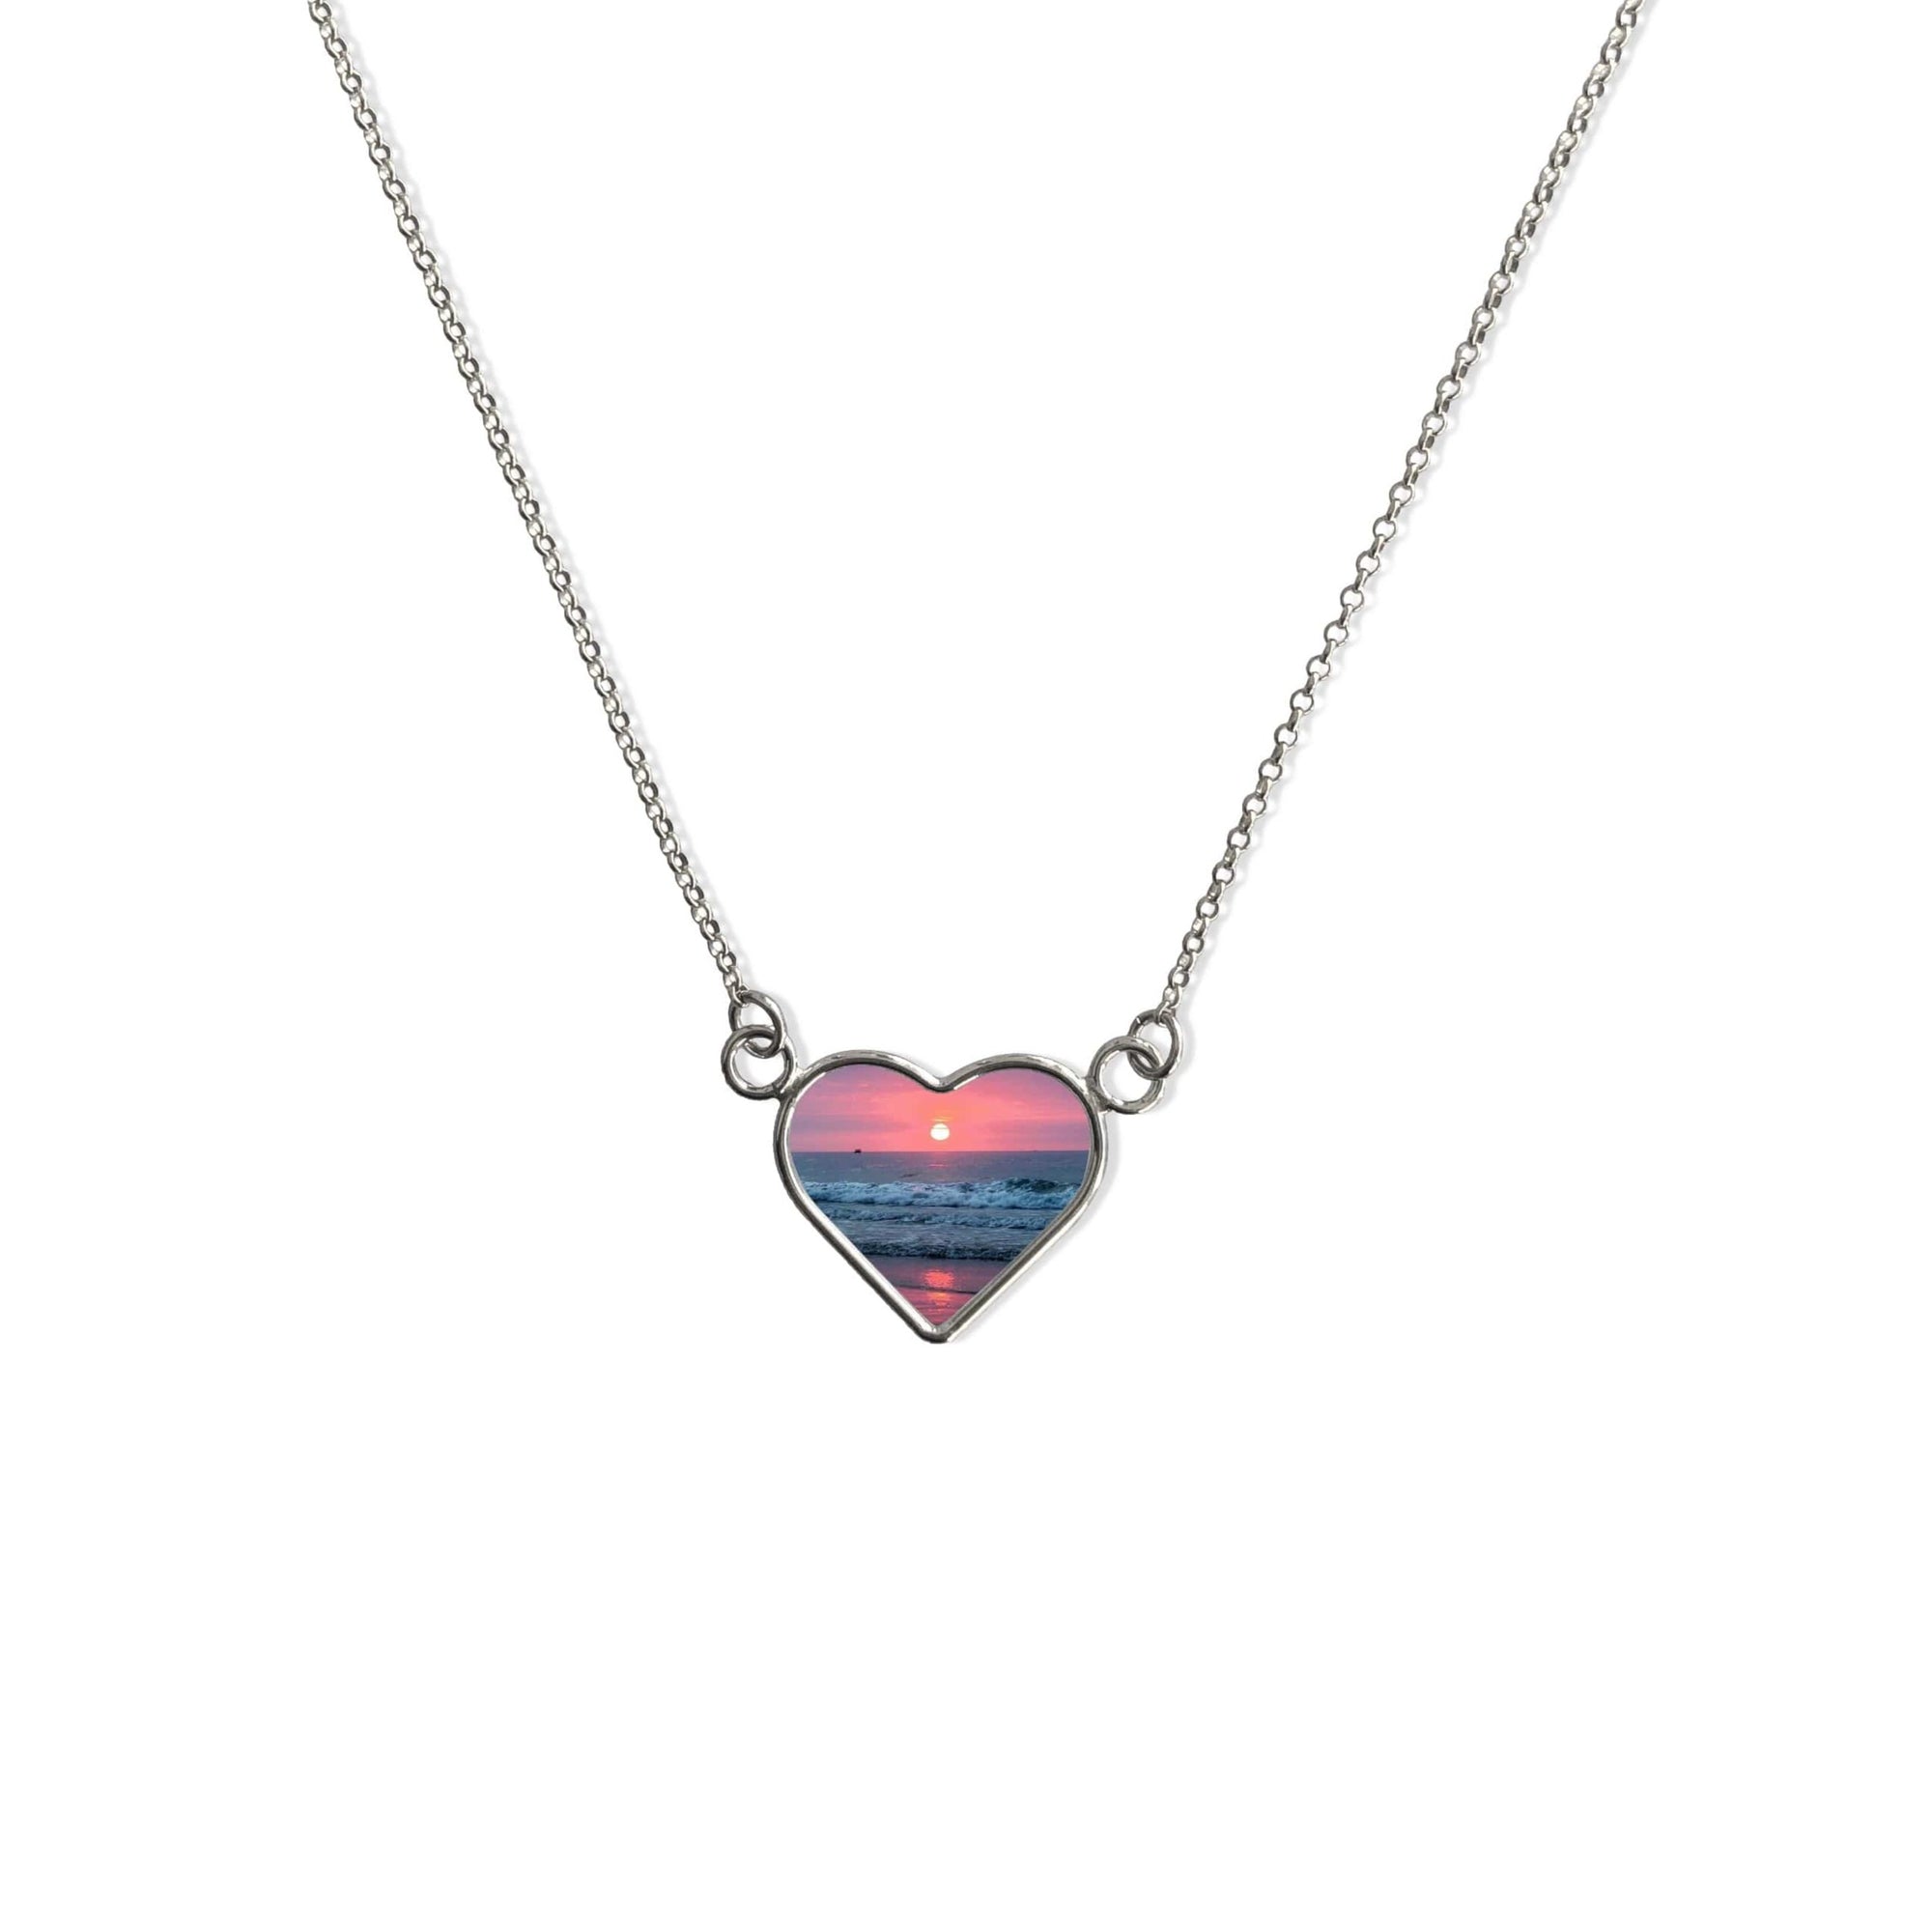 Coastal Maine Sunset Heart Necklace by Kerry Daly